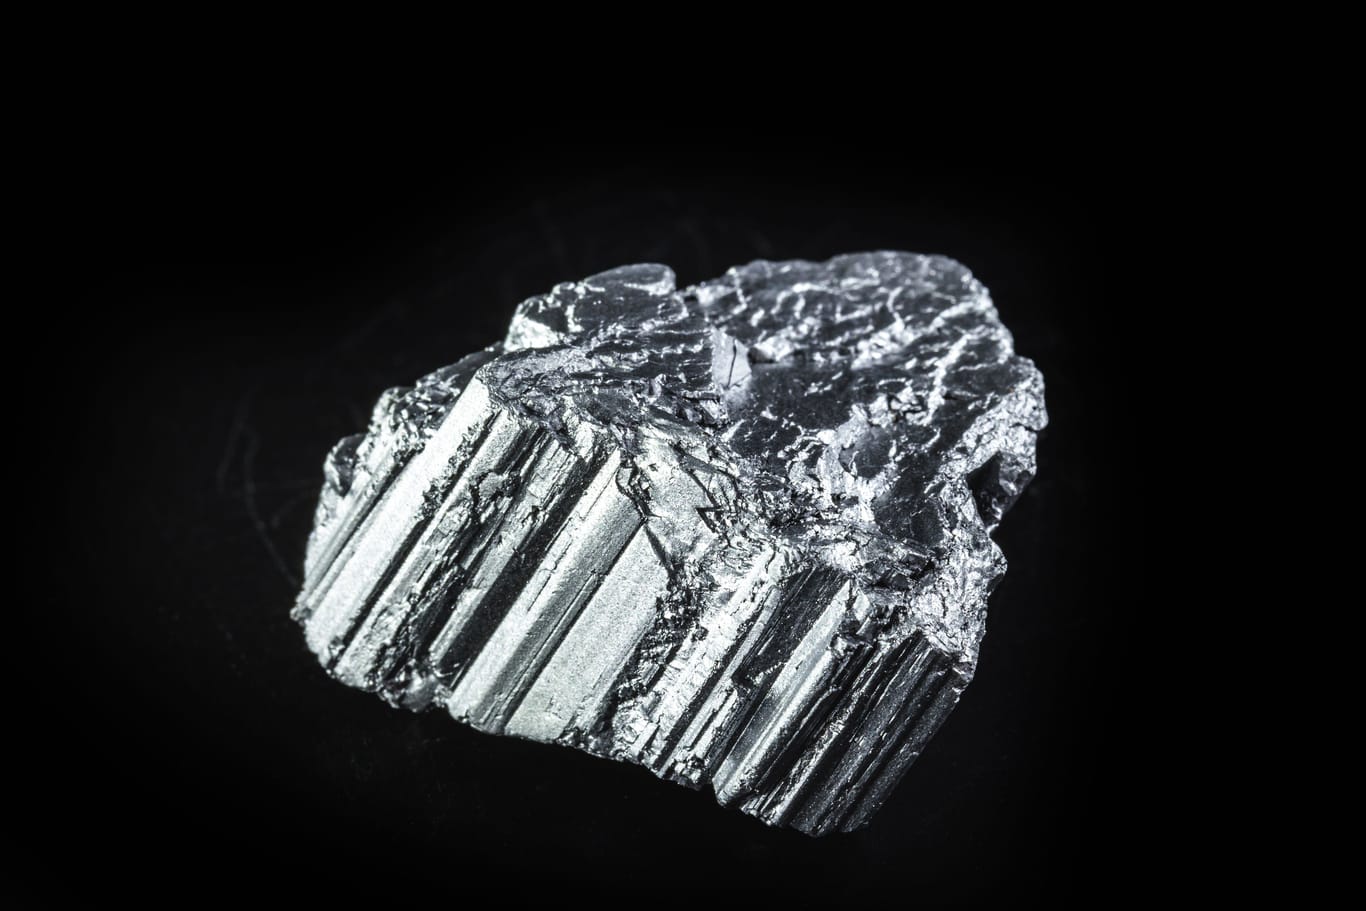 neodymium stone, part of the rare earth group, the world's strongest magnetic ore used in the technology industry